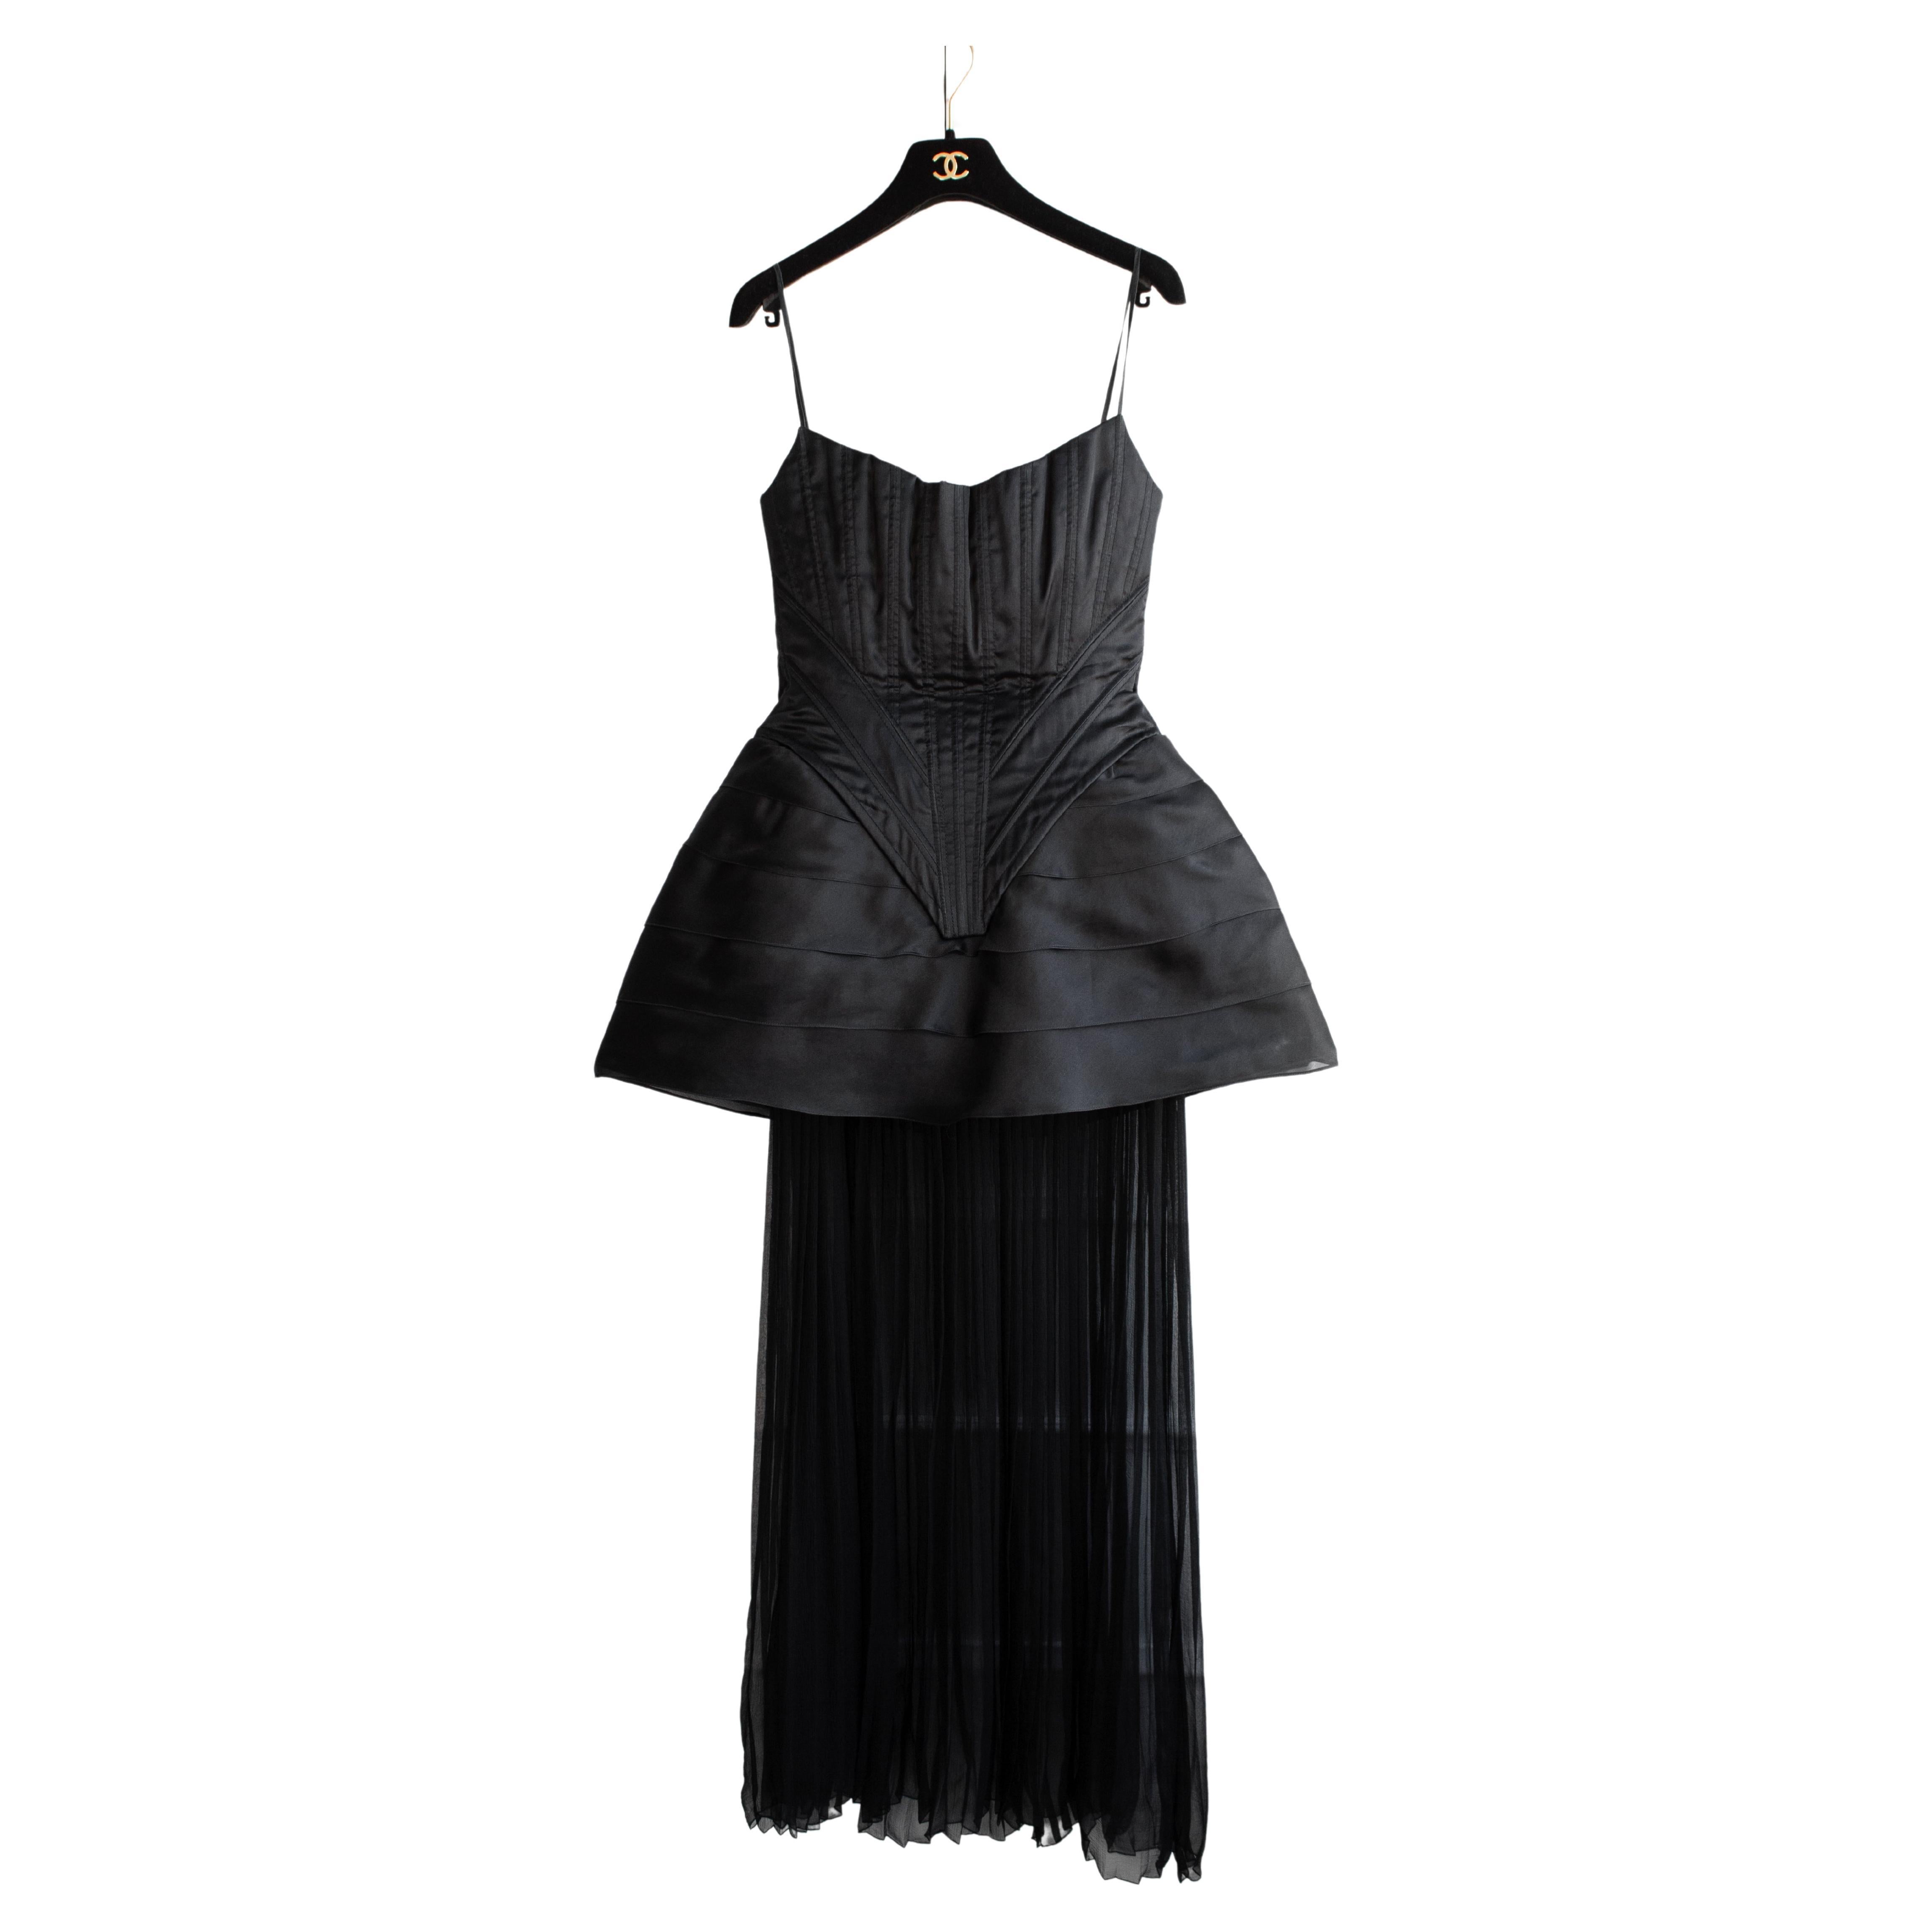 Chanel Vintage Haute Couture Fall/Winter 1992 Black Satin Corset Gown Dress For Sale